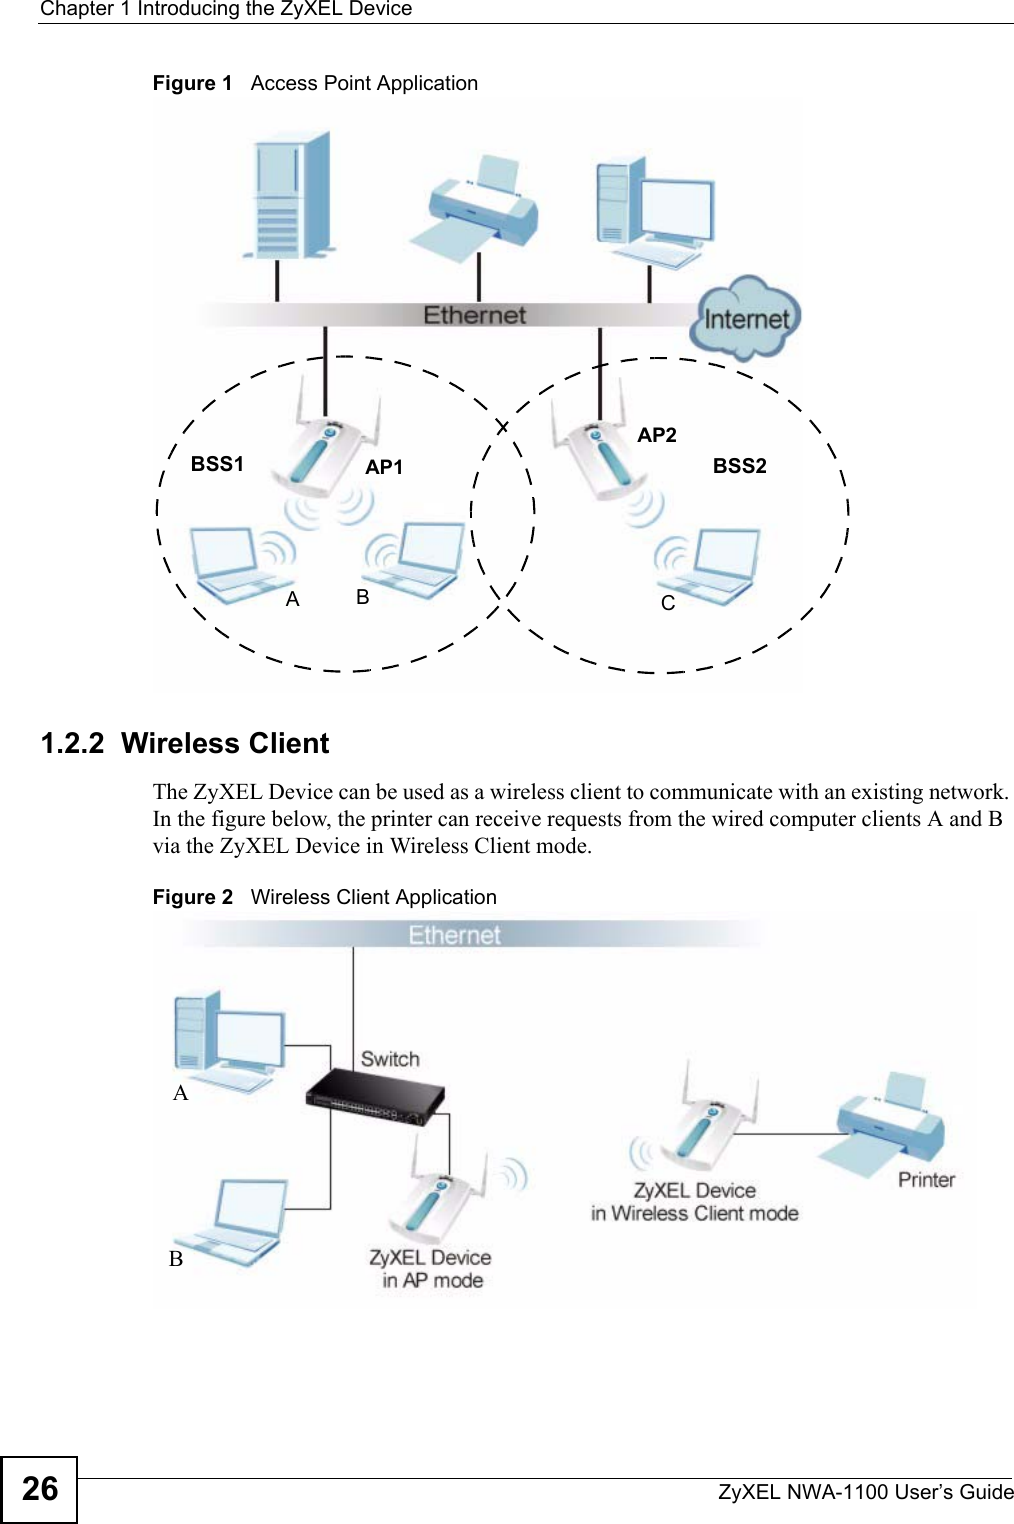 Chapter 1 Introducing the ZyXEL DeviceZyXEL NWA-1100 User’s Guide26Figure 1   Access Point Application1.2.2  Wireless ClientThe ZyXEL Device can be used as a wireless client to communicate with an existing network. In the figure below, the printer can receive requests from the wired computer clients A and B via the ZyXEL Device in Wireless Client mode.Figure 2   Wireless Client ApplicationAP1AP2ABCBSS2BSS1AB